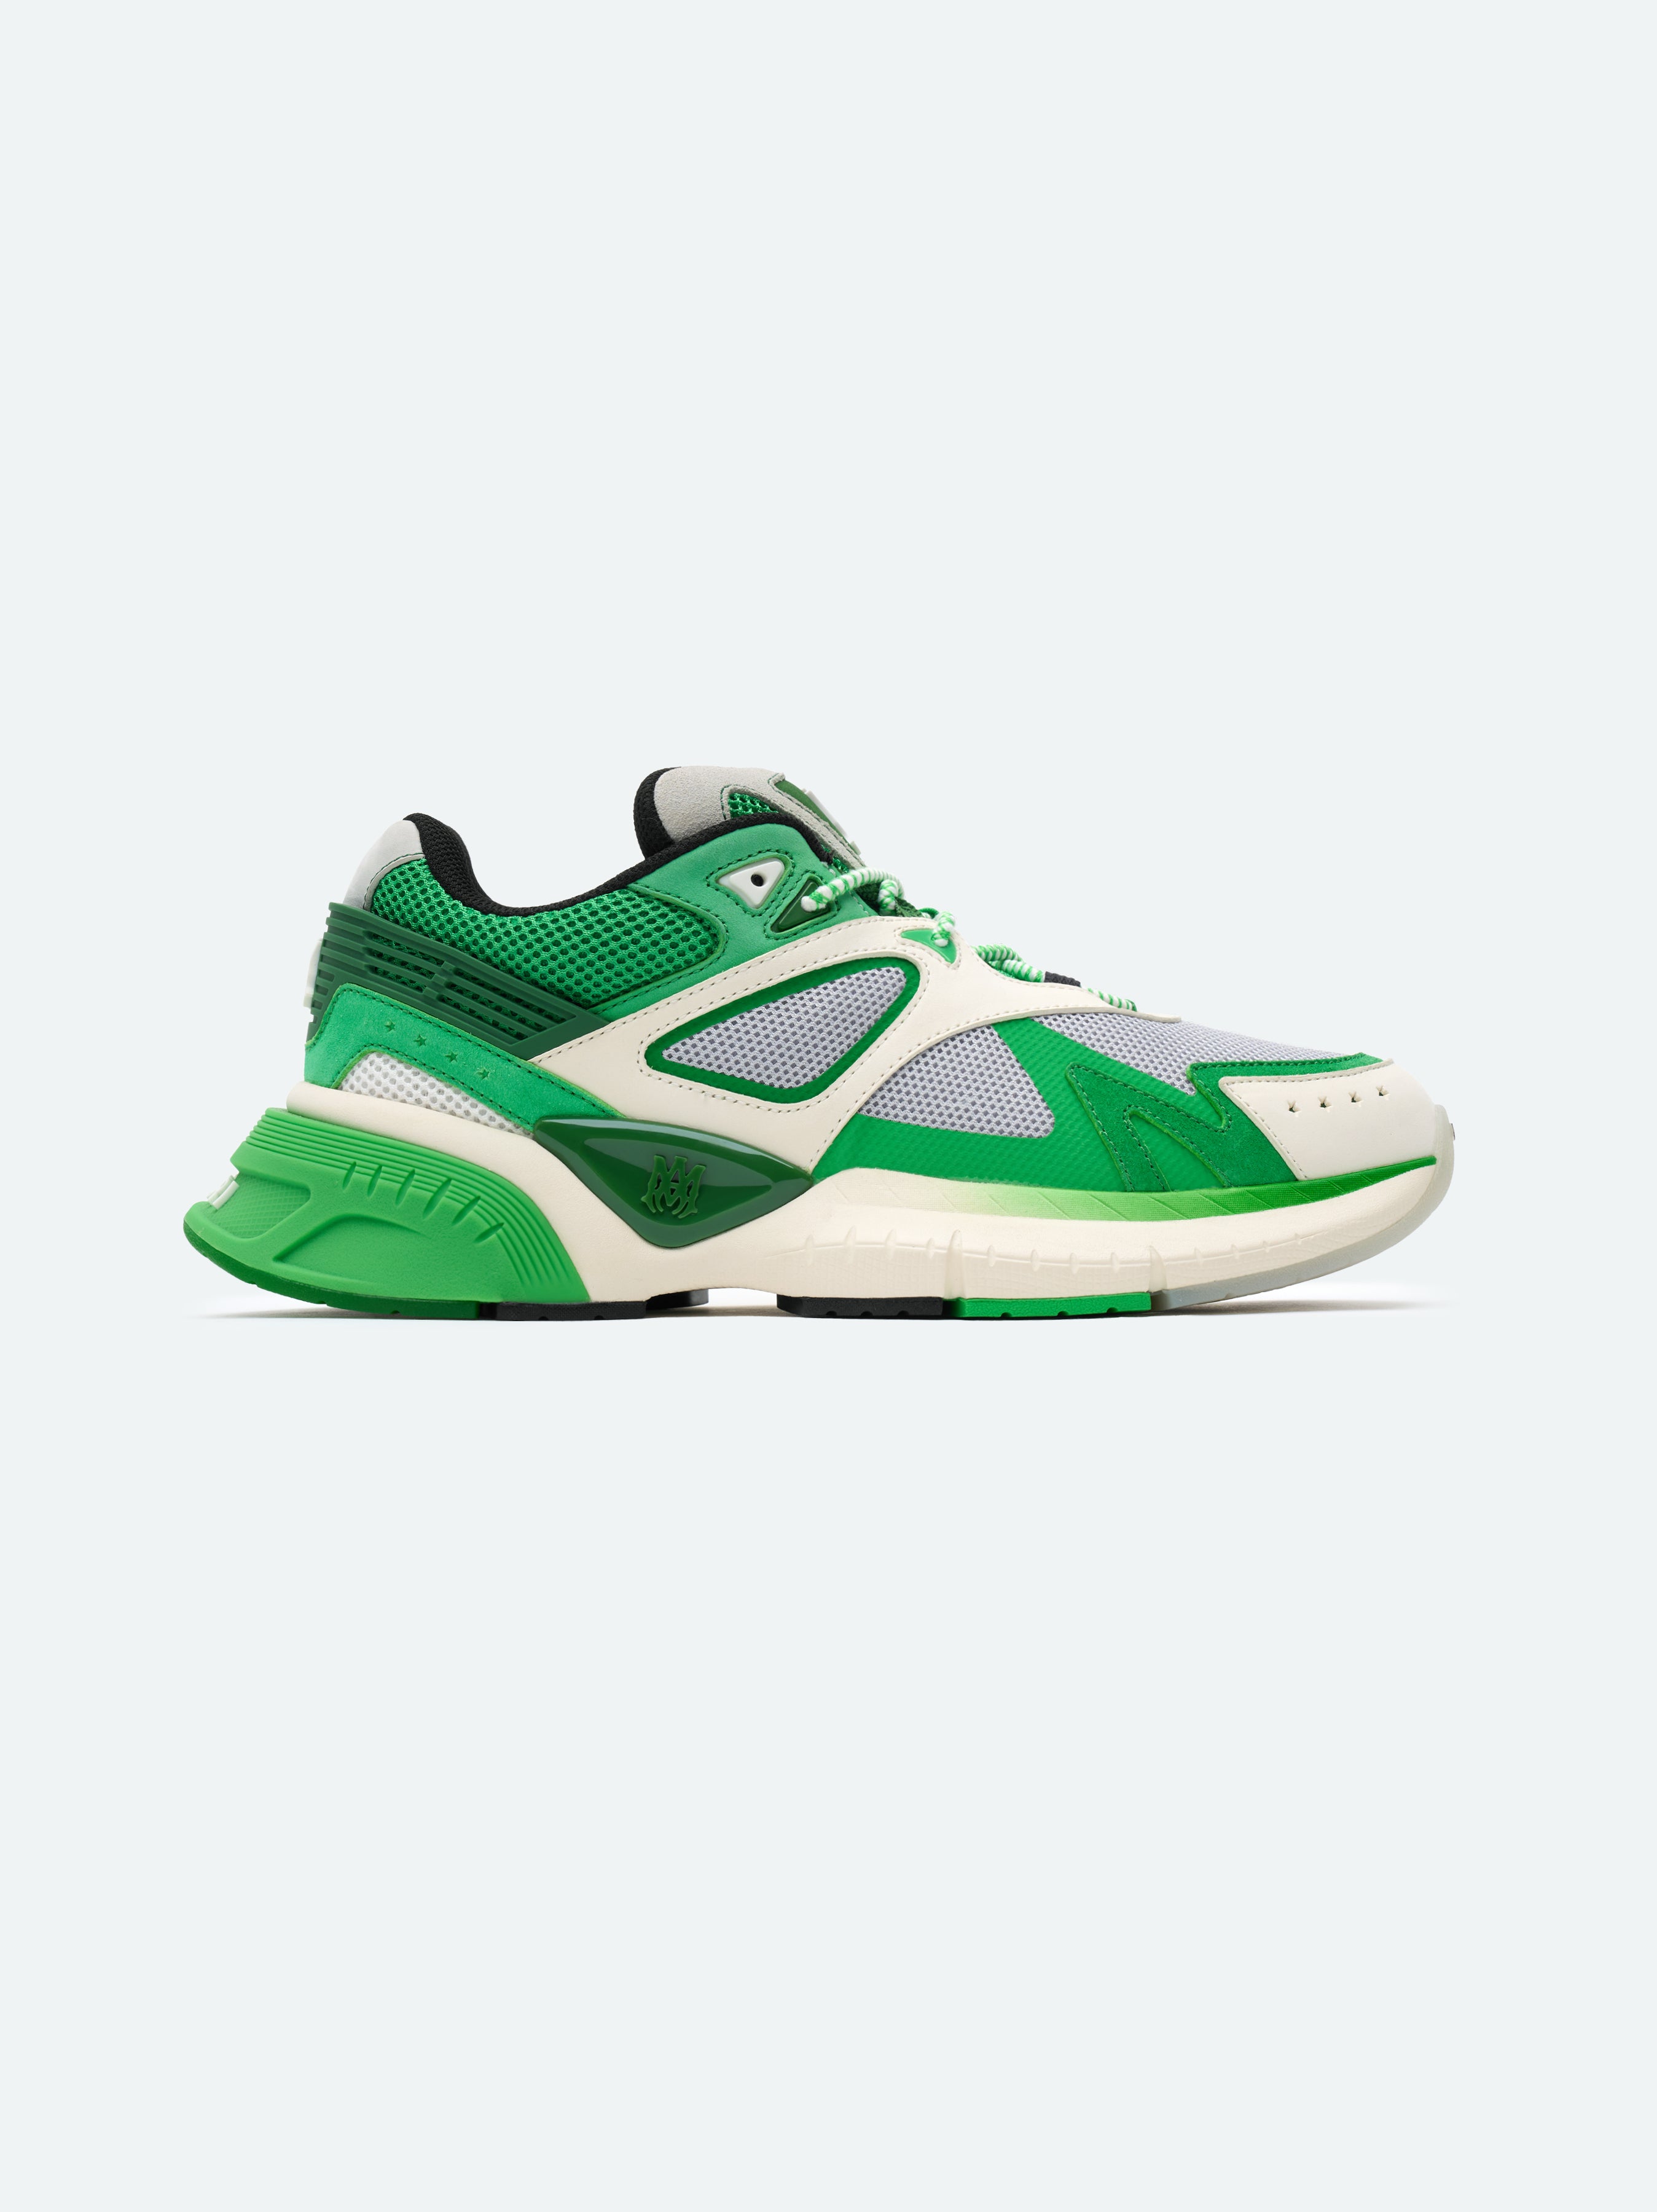 Product MA RUNNER - GREEN featured image